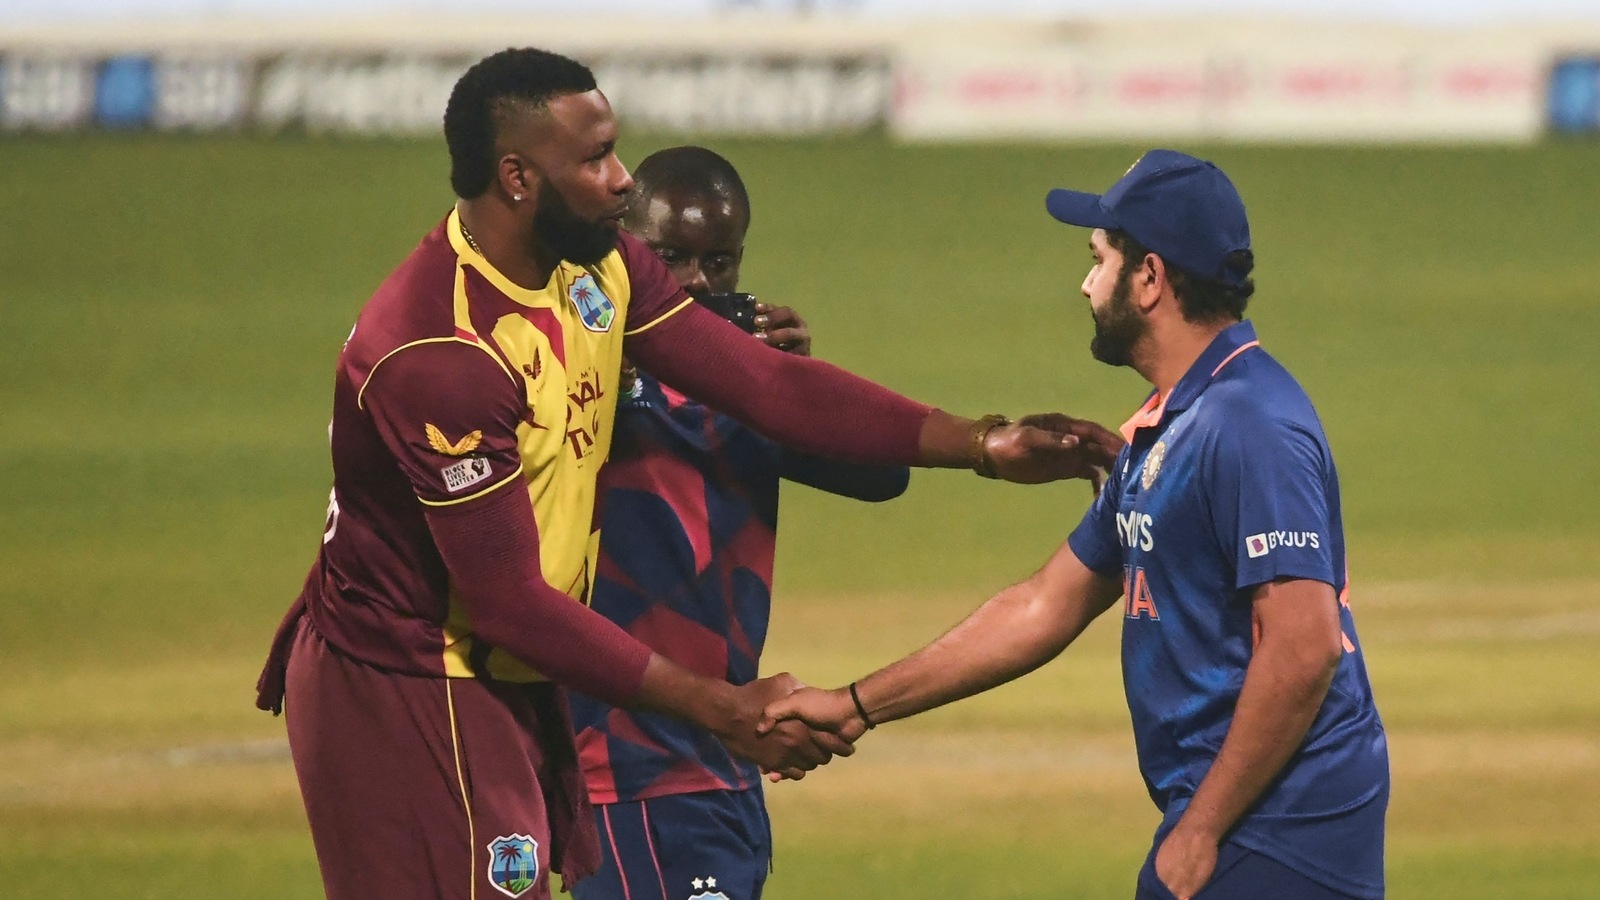 India vs West Indies Live Streaming 3rd T20I When and where to watch 3rd T20I? Cricket